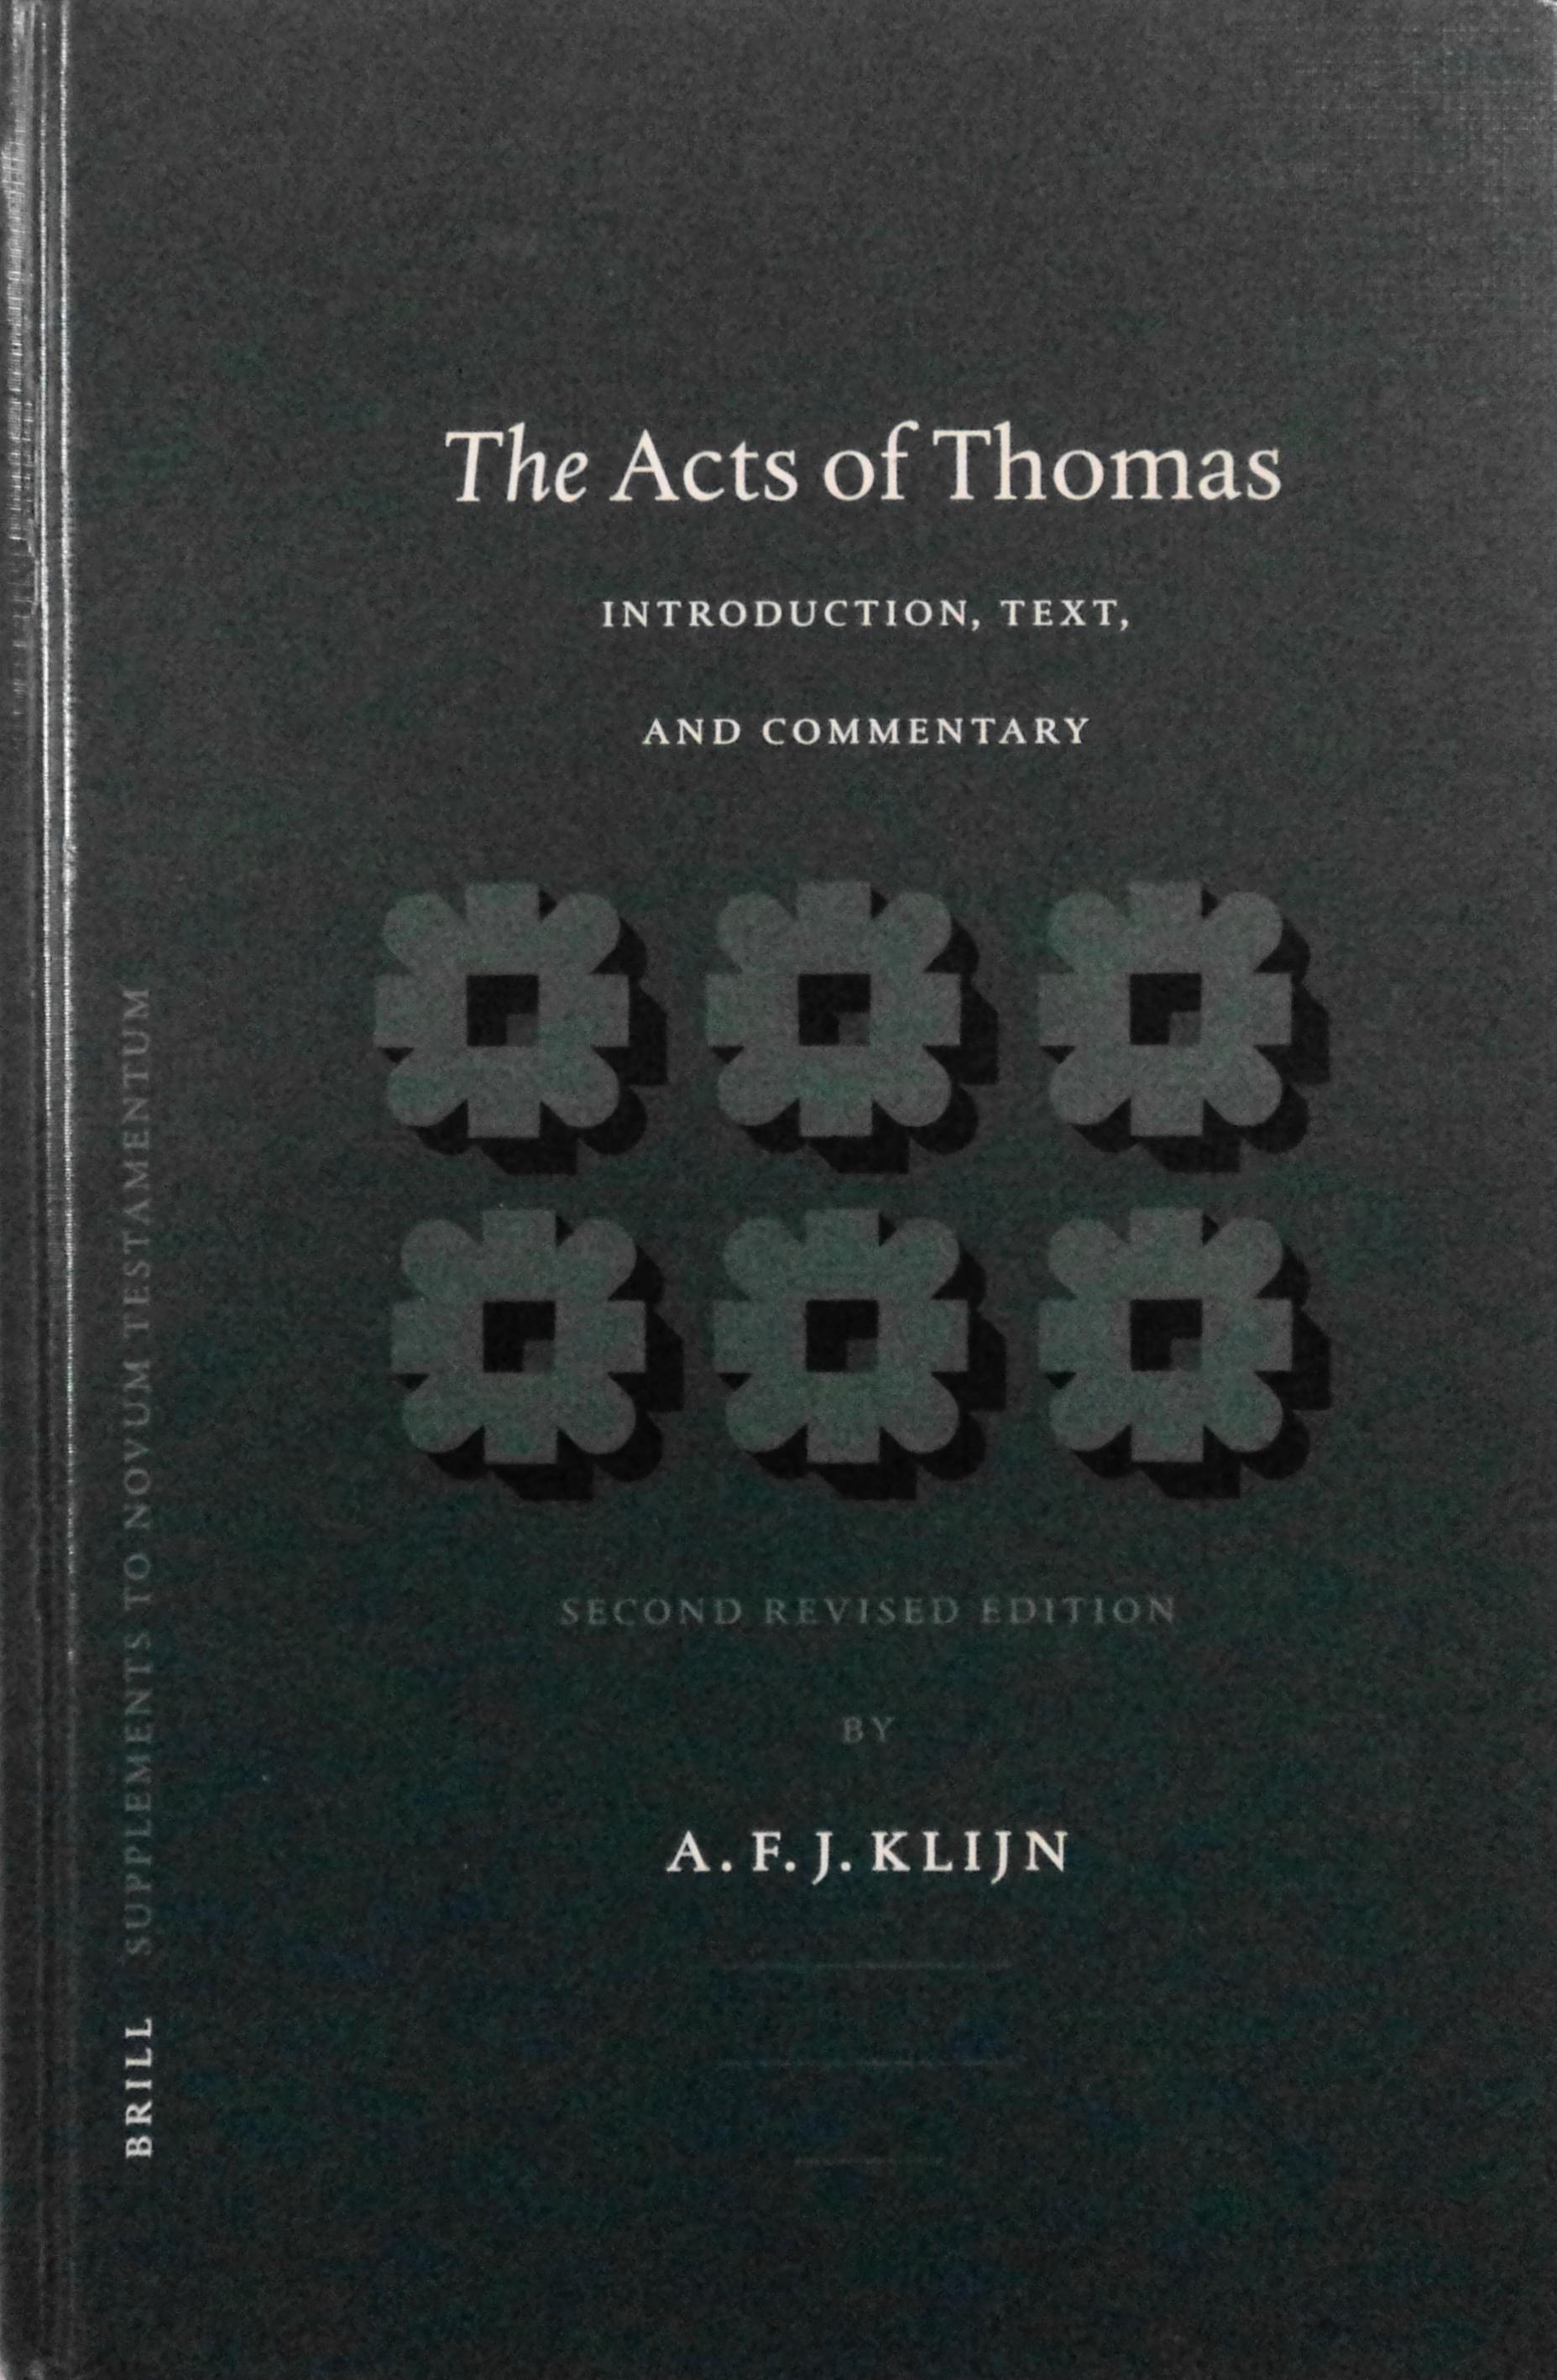 The Acts of Thomas: Introduction, Text, and Commentary (Supplements to Novum Testamentum, 108) - A F J Klijn